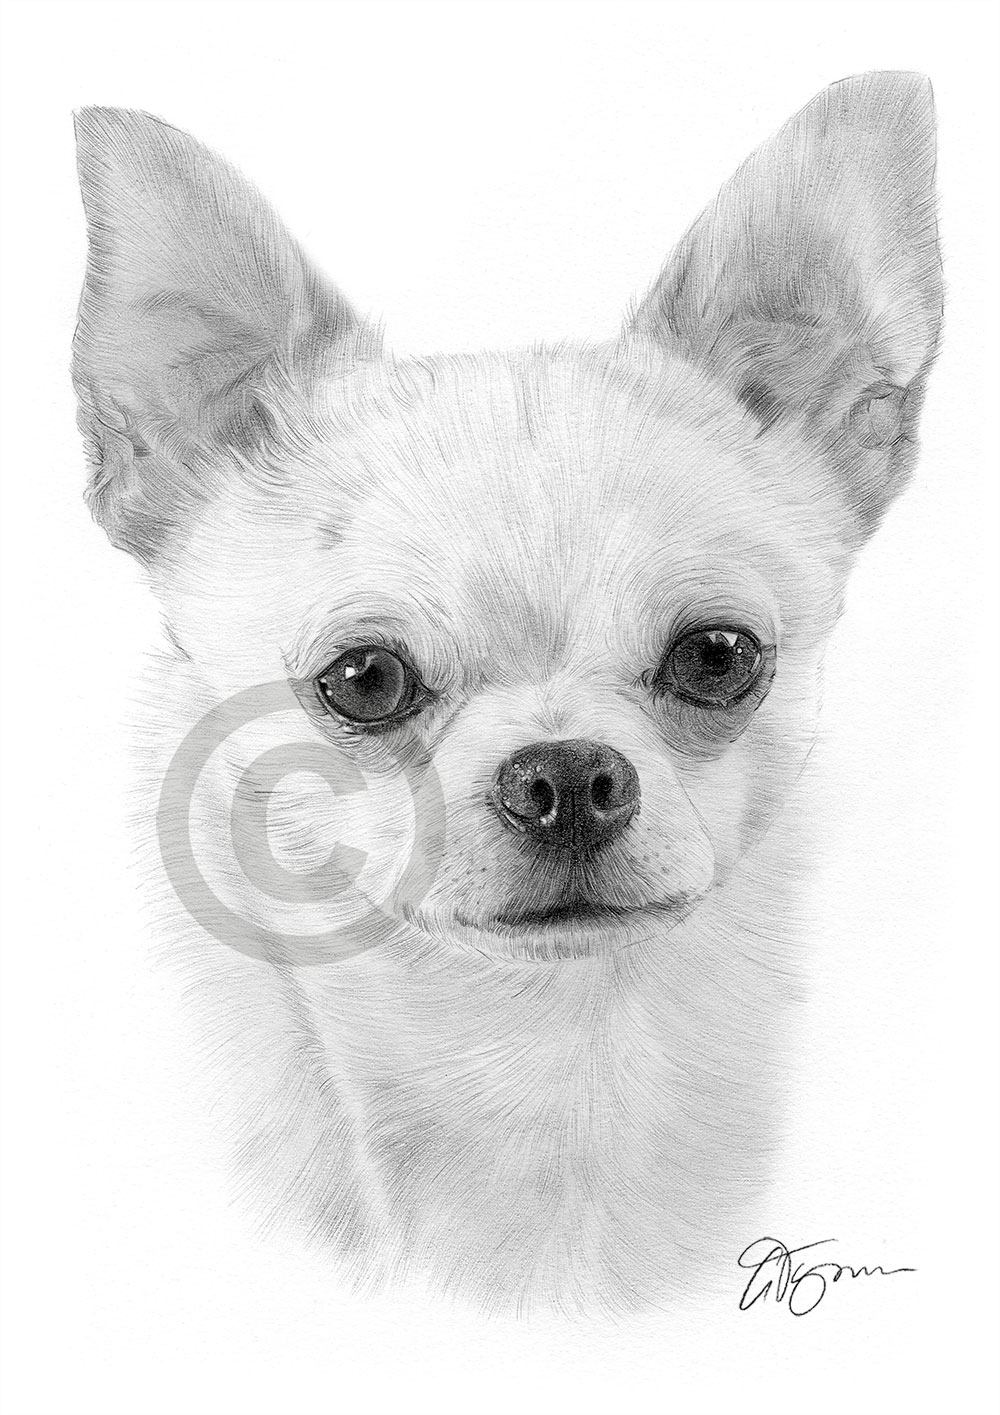 Creative Drawings And Sketchings Of Chihuahuas for Girl